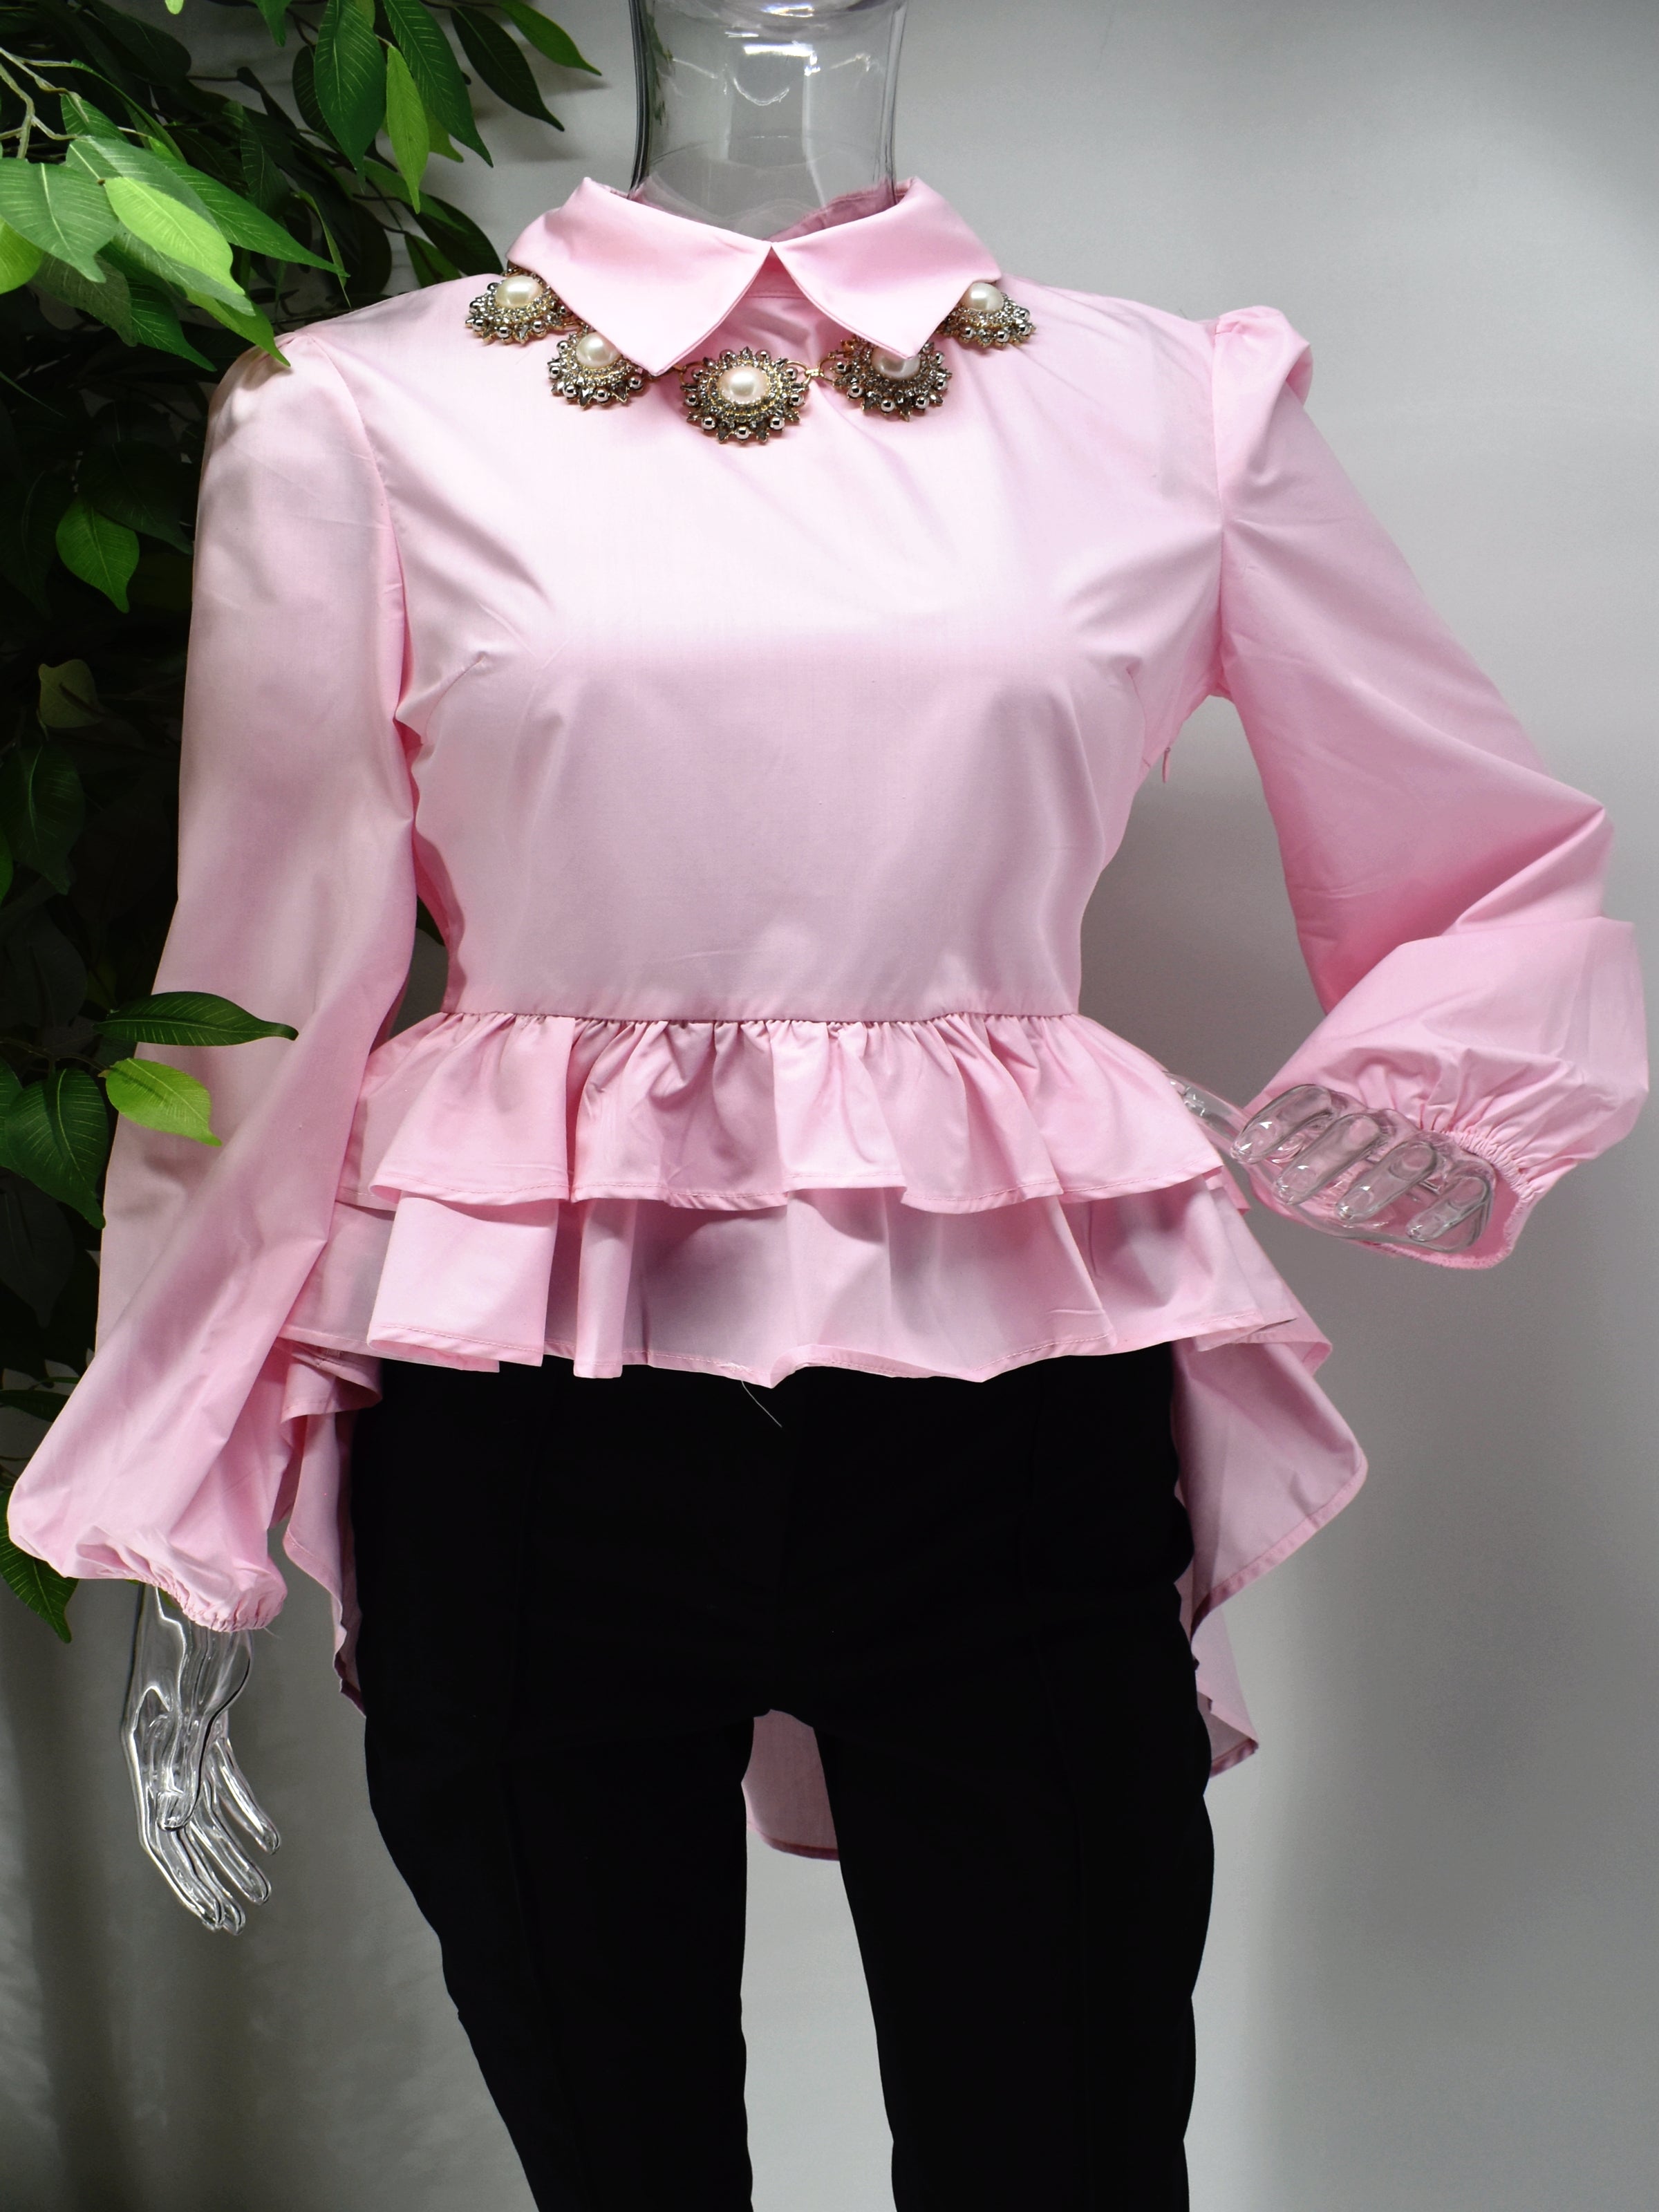 Fashion forward yet comfortably chic is what our Brier pink shirt Blouse will deliver.  Brier is a pink shirt blouse with a ruffled peplum waistline with the back hem longer than the front. 